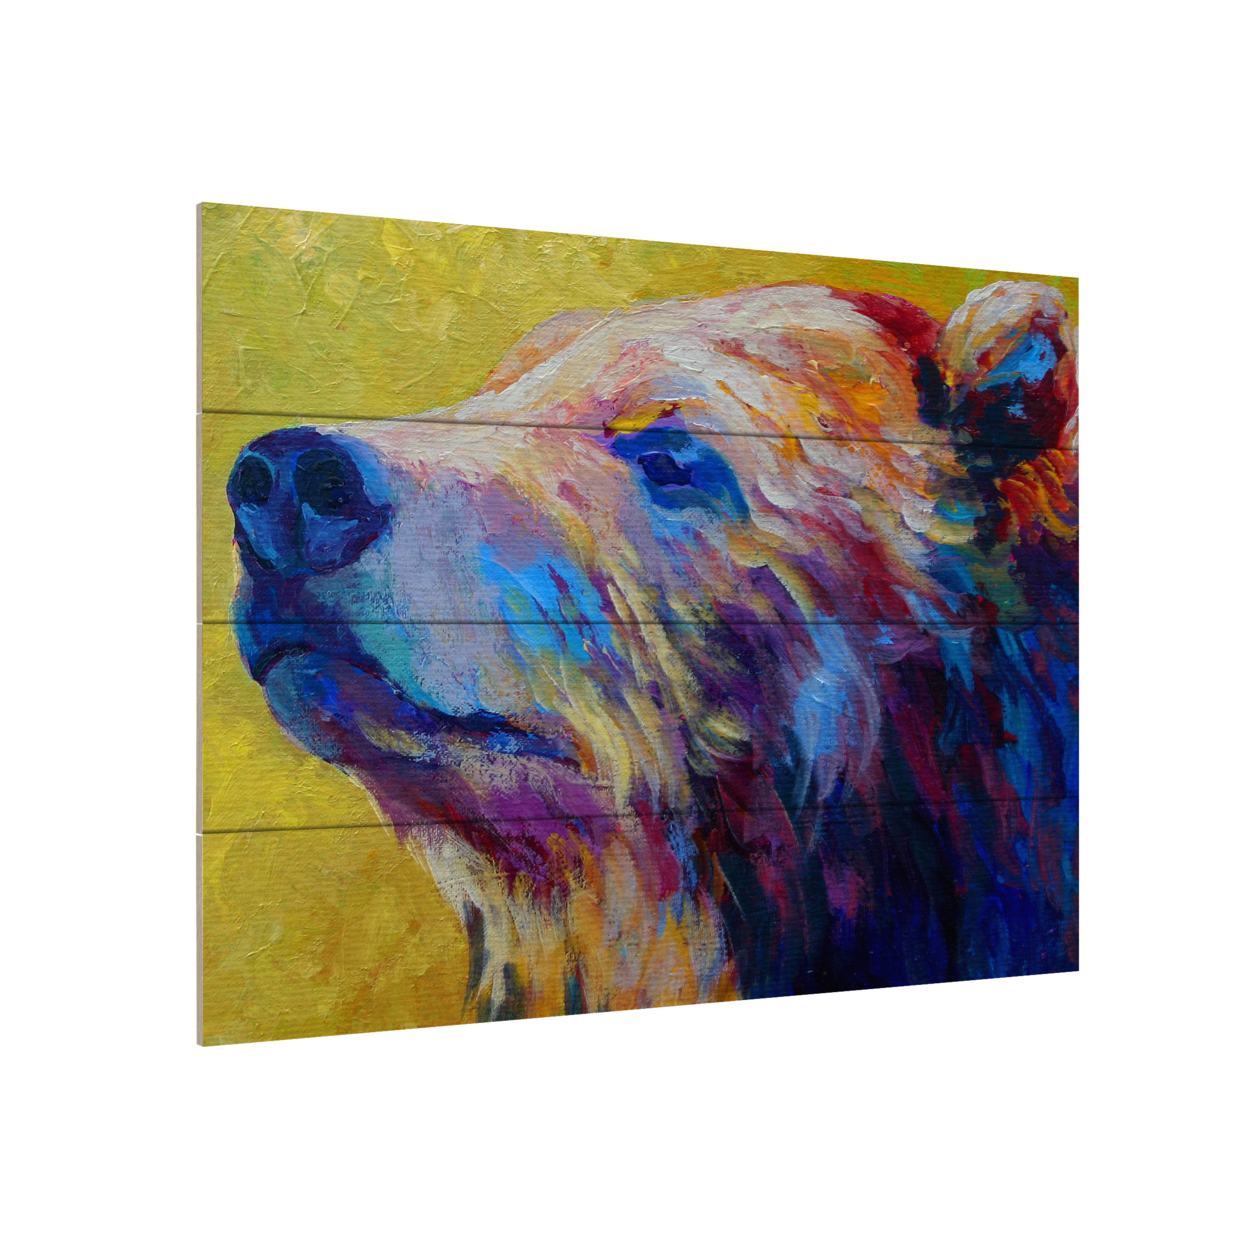 Wall Art 12 X 16 Inches Titled Pretty Boy Grizz Ready To Hang Printed On Wooden Planks